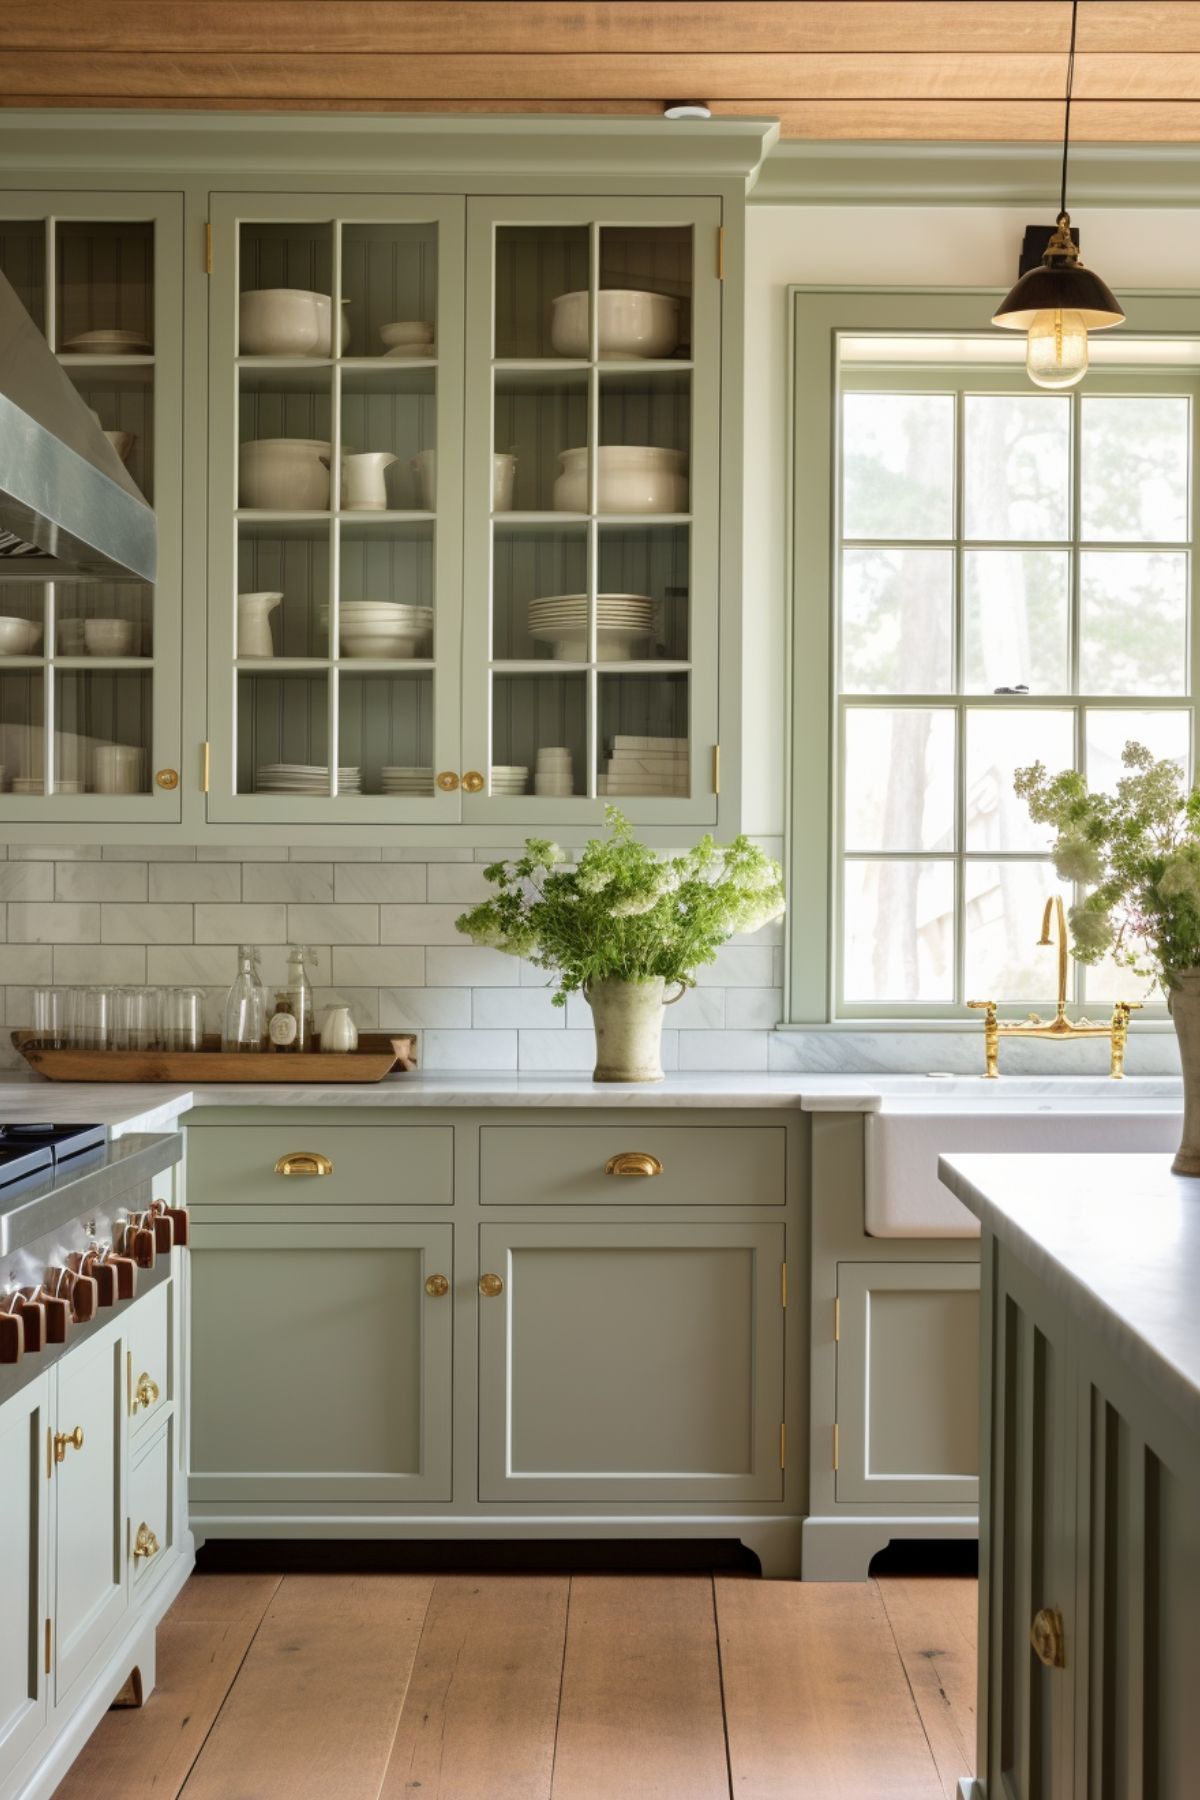 The Kitchen Essential Tips for an Organized and Functional Cooking Space